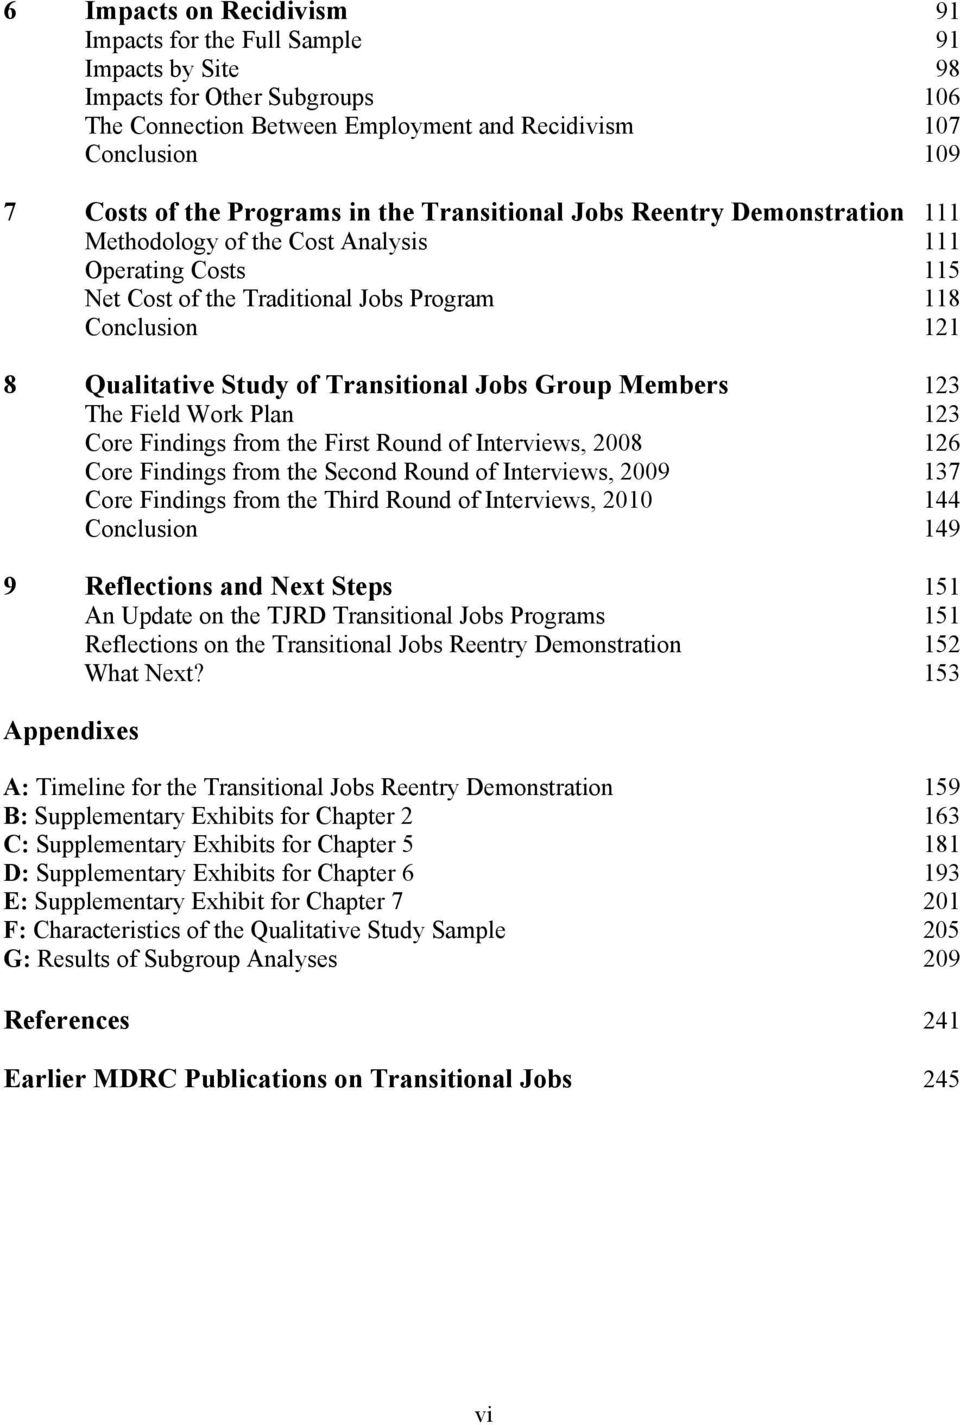 Transitional Jobs Group Members 123 The Field Work Plan 123 Core Findings from the First Round of Interviews, 2008 126 Core Findings from the Second Round of Interviews, 2009 137 Core Findings from